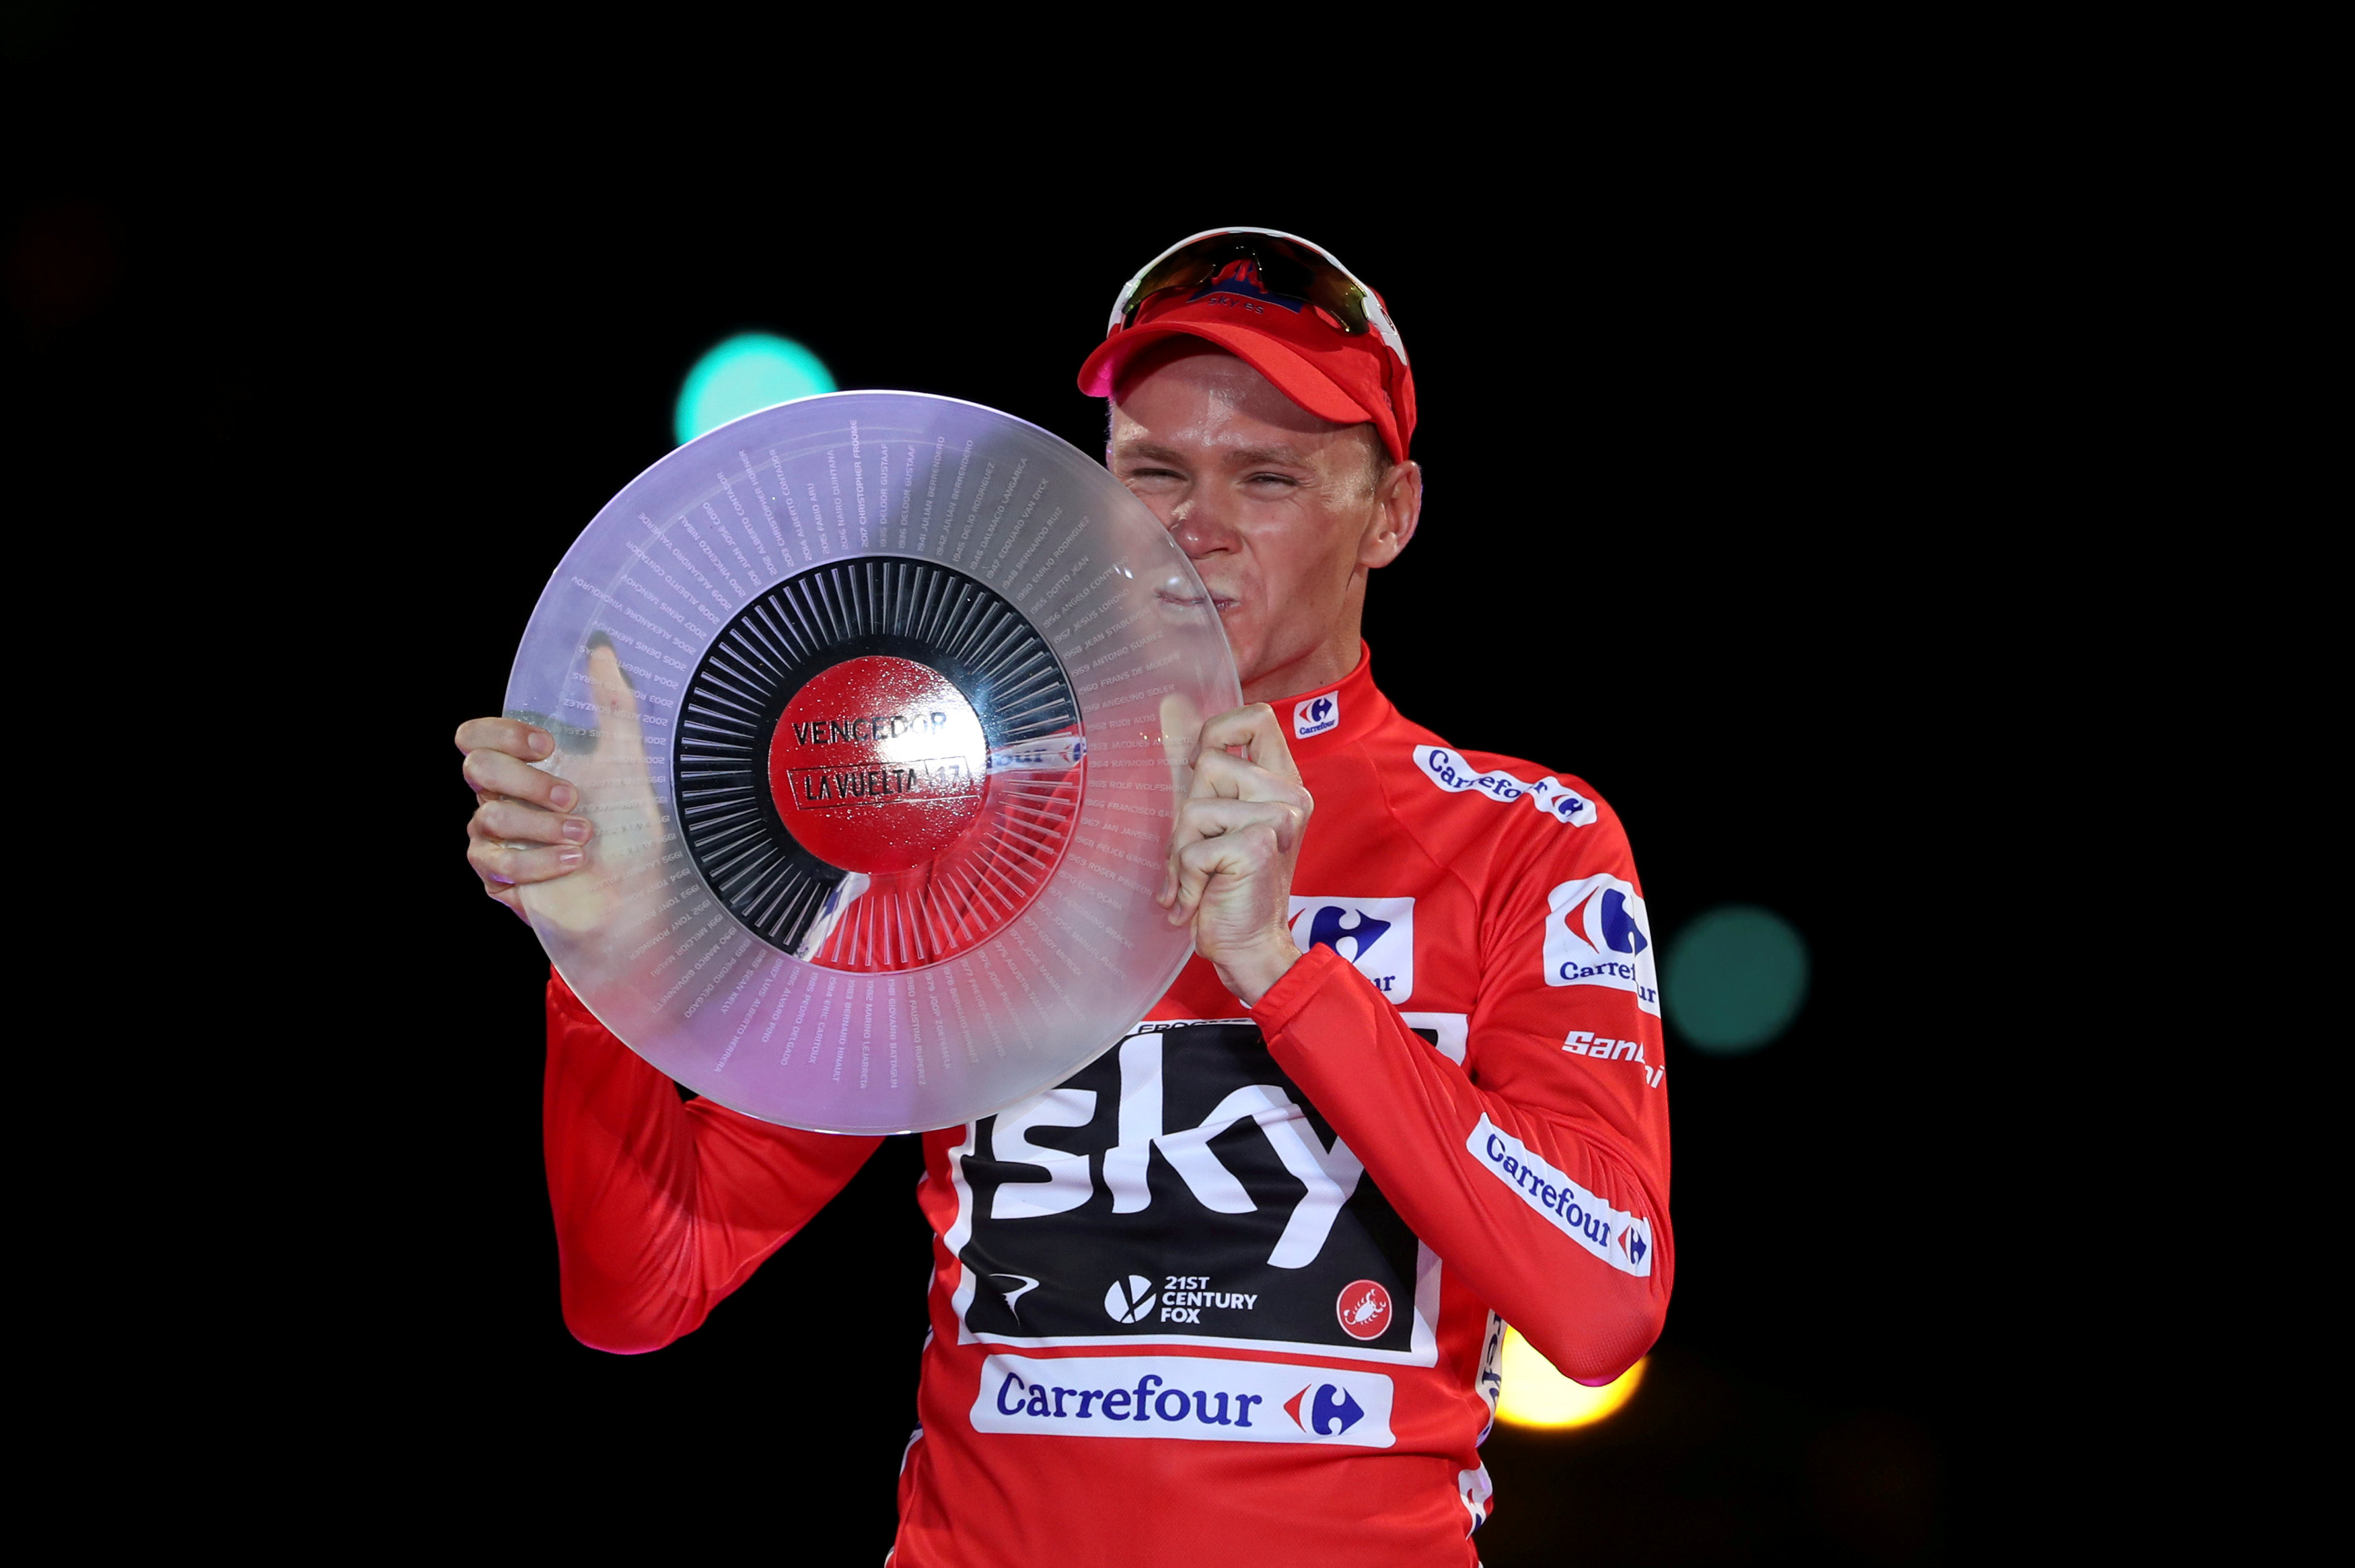 Cycling: Froome faces tough questions after positive test